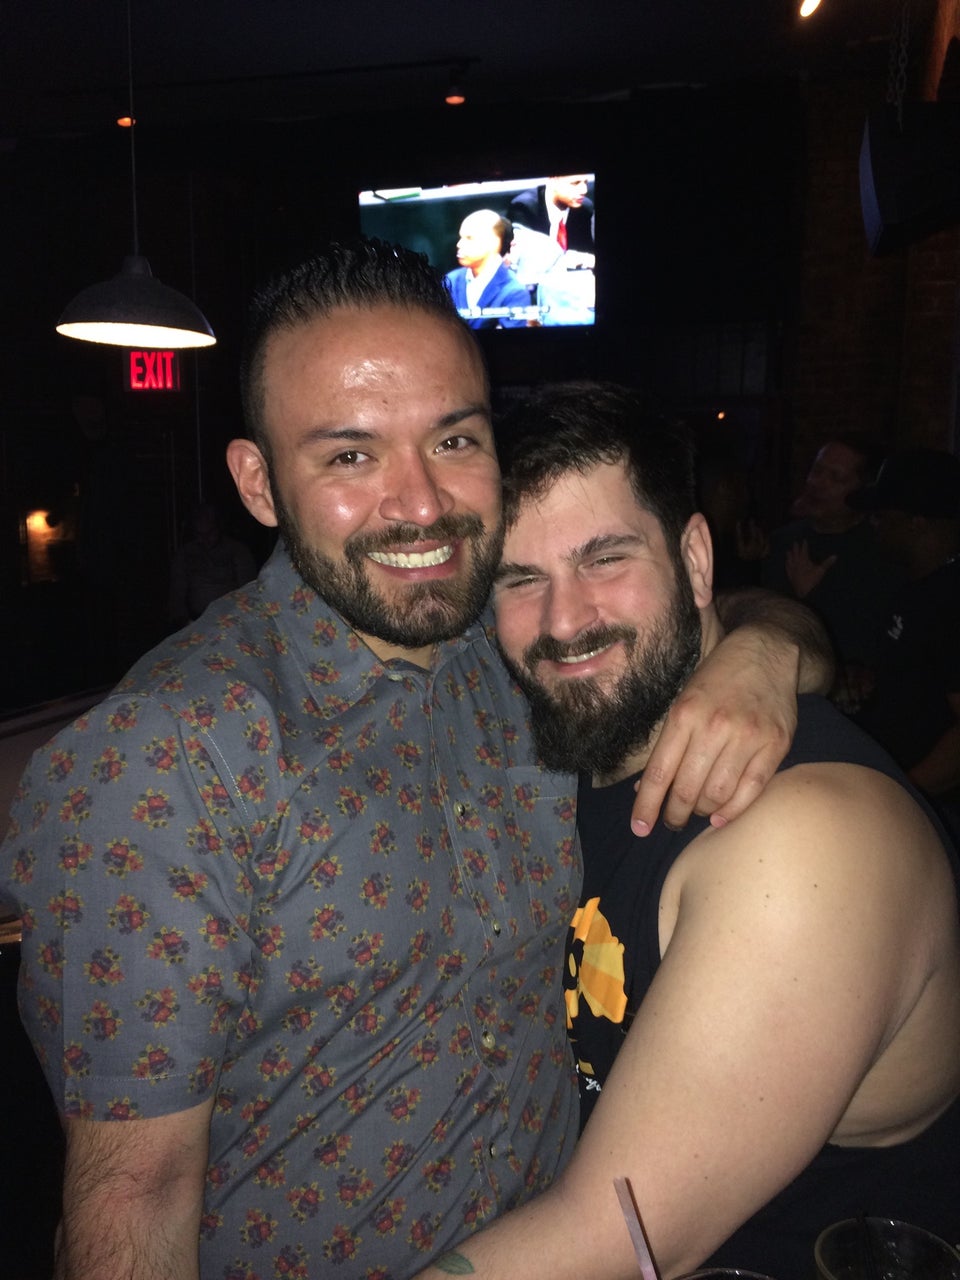 Ty S Bar Nyc Reviews Photos West Village New York City Gaycities New York City